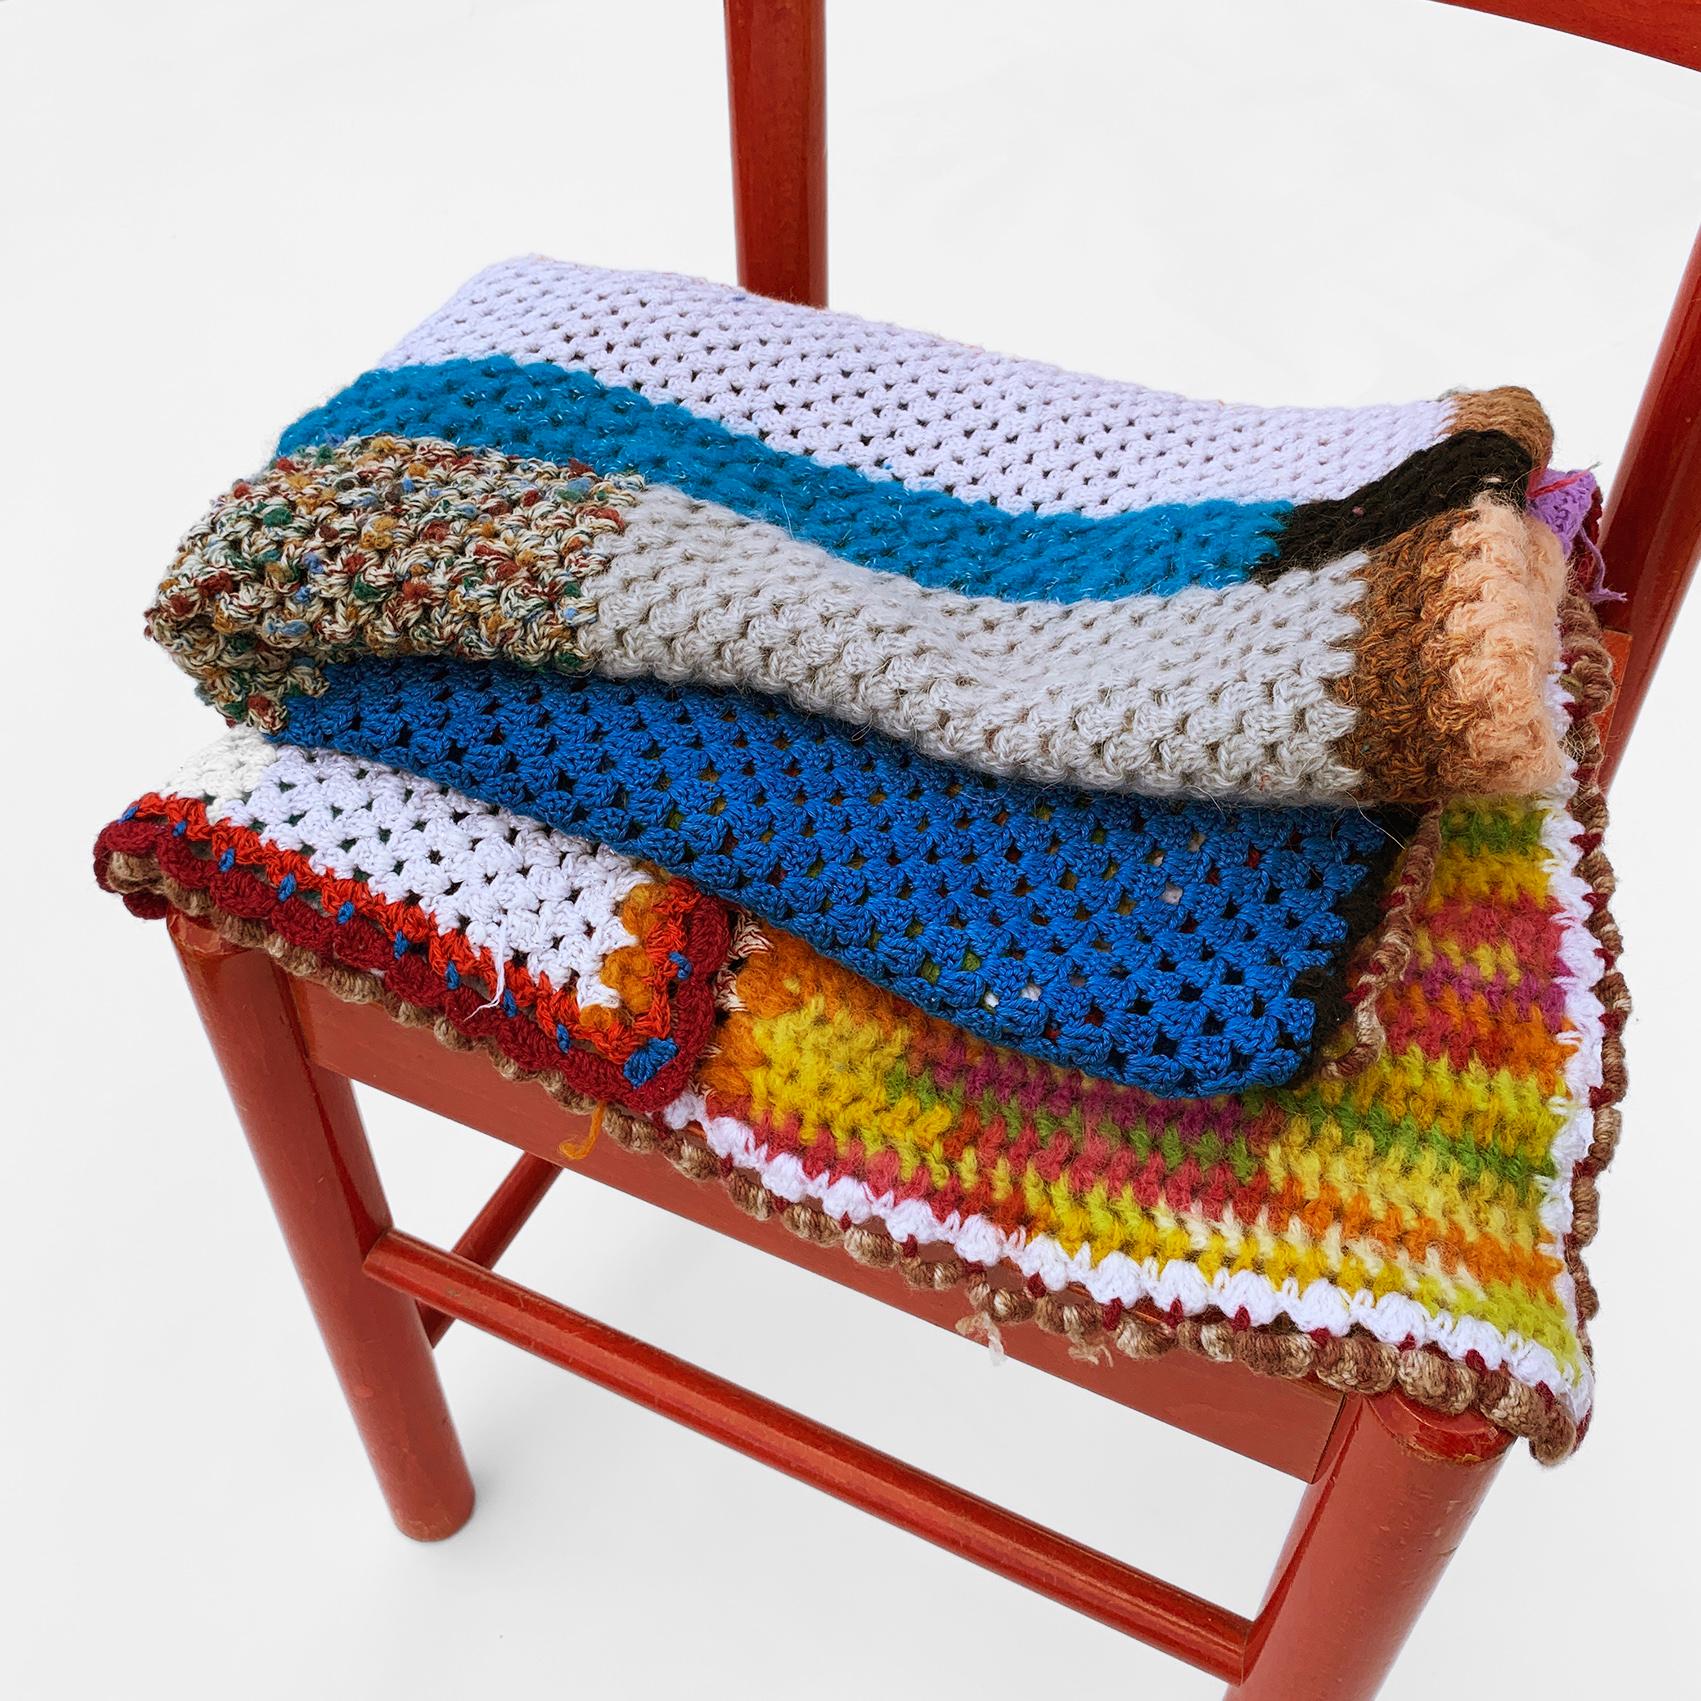 Contemporary Handmade Crochet Patchwork Throw Knitted Blanket Sofa Bed Armchair For Sale